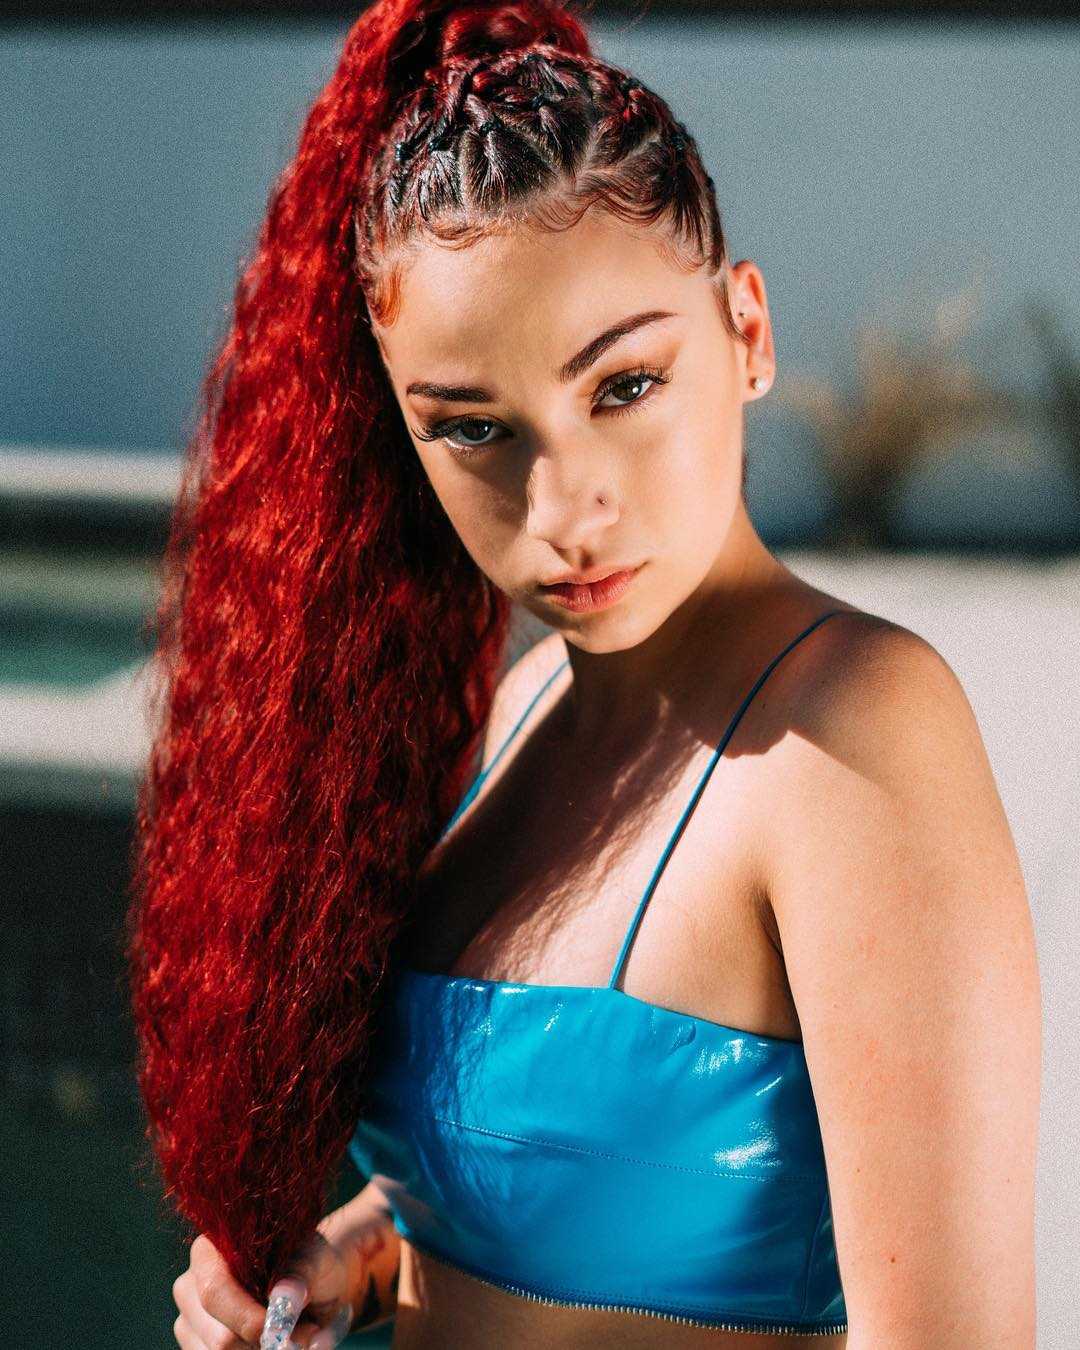 70+ Hot Pictures Of Danielle Bregoli aka Bhad Bhabie Which Will Win Your Heart 268